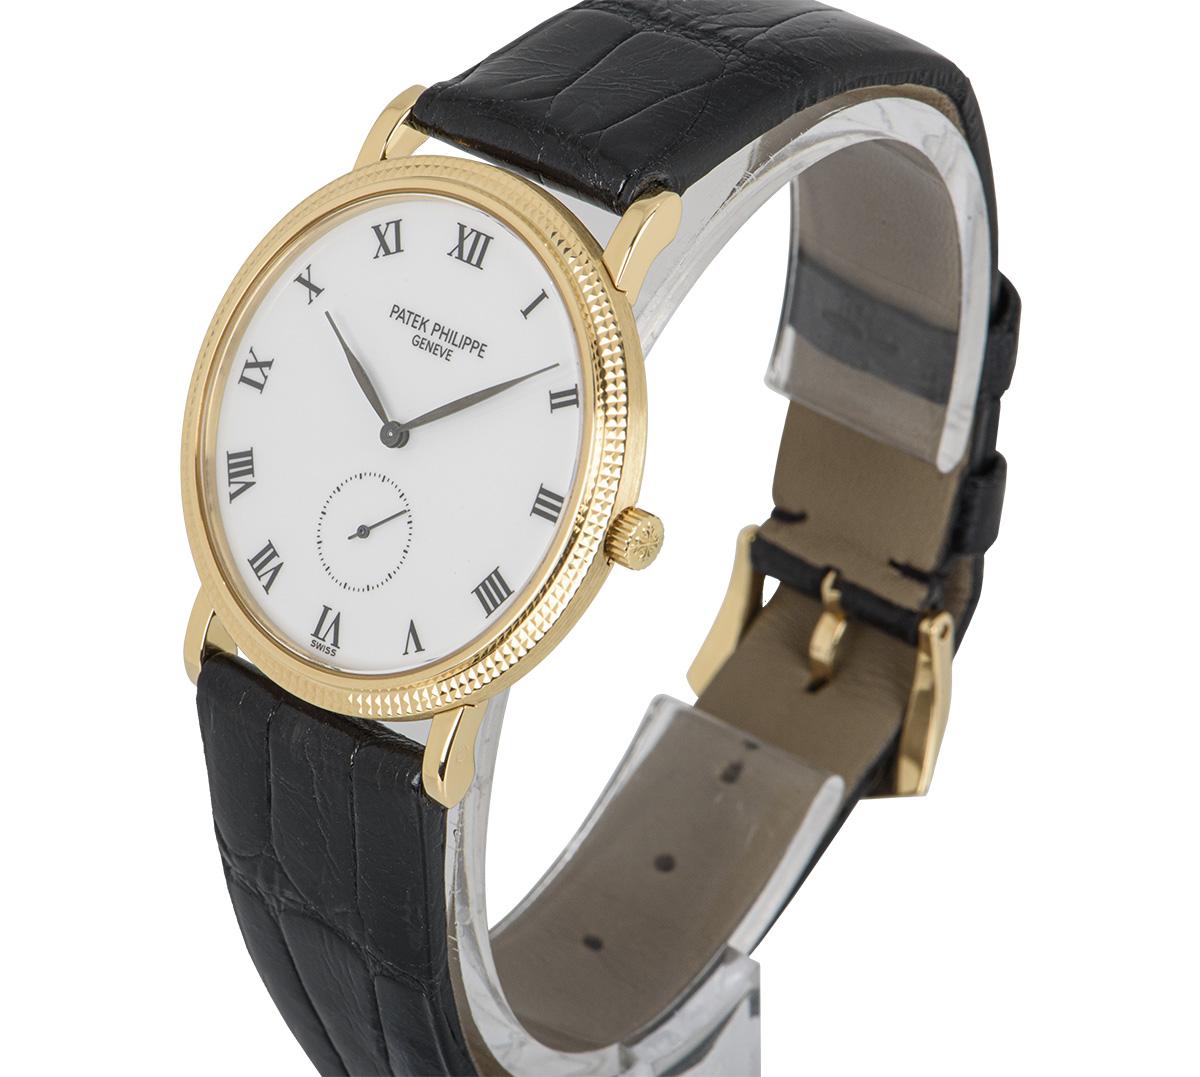 A 33 mm 18k Yellow Gold Calatrava Men's Wristwatch, porcelain white dial with roman numerals, small seconds at 6 0'clock, a fixed 18k yellow gold hobnail bezel, a black leather strap with an original 18k yellow gold pin buckle, sapphire glass,